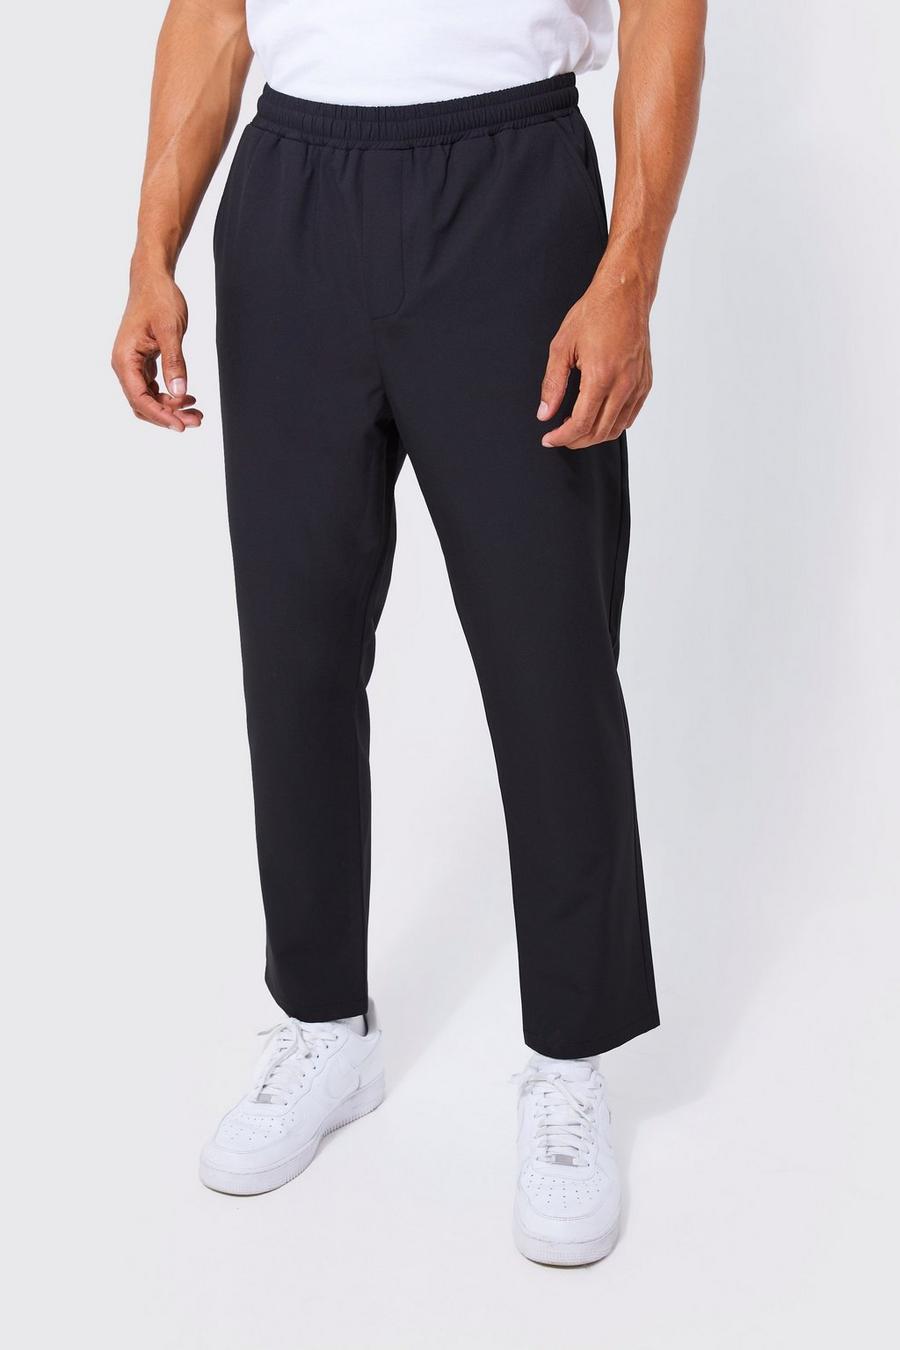 Black Elasticated Tapered 4 Way Stretch Smart Pants image number 1